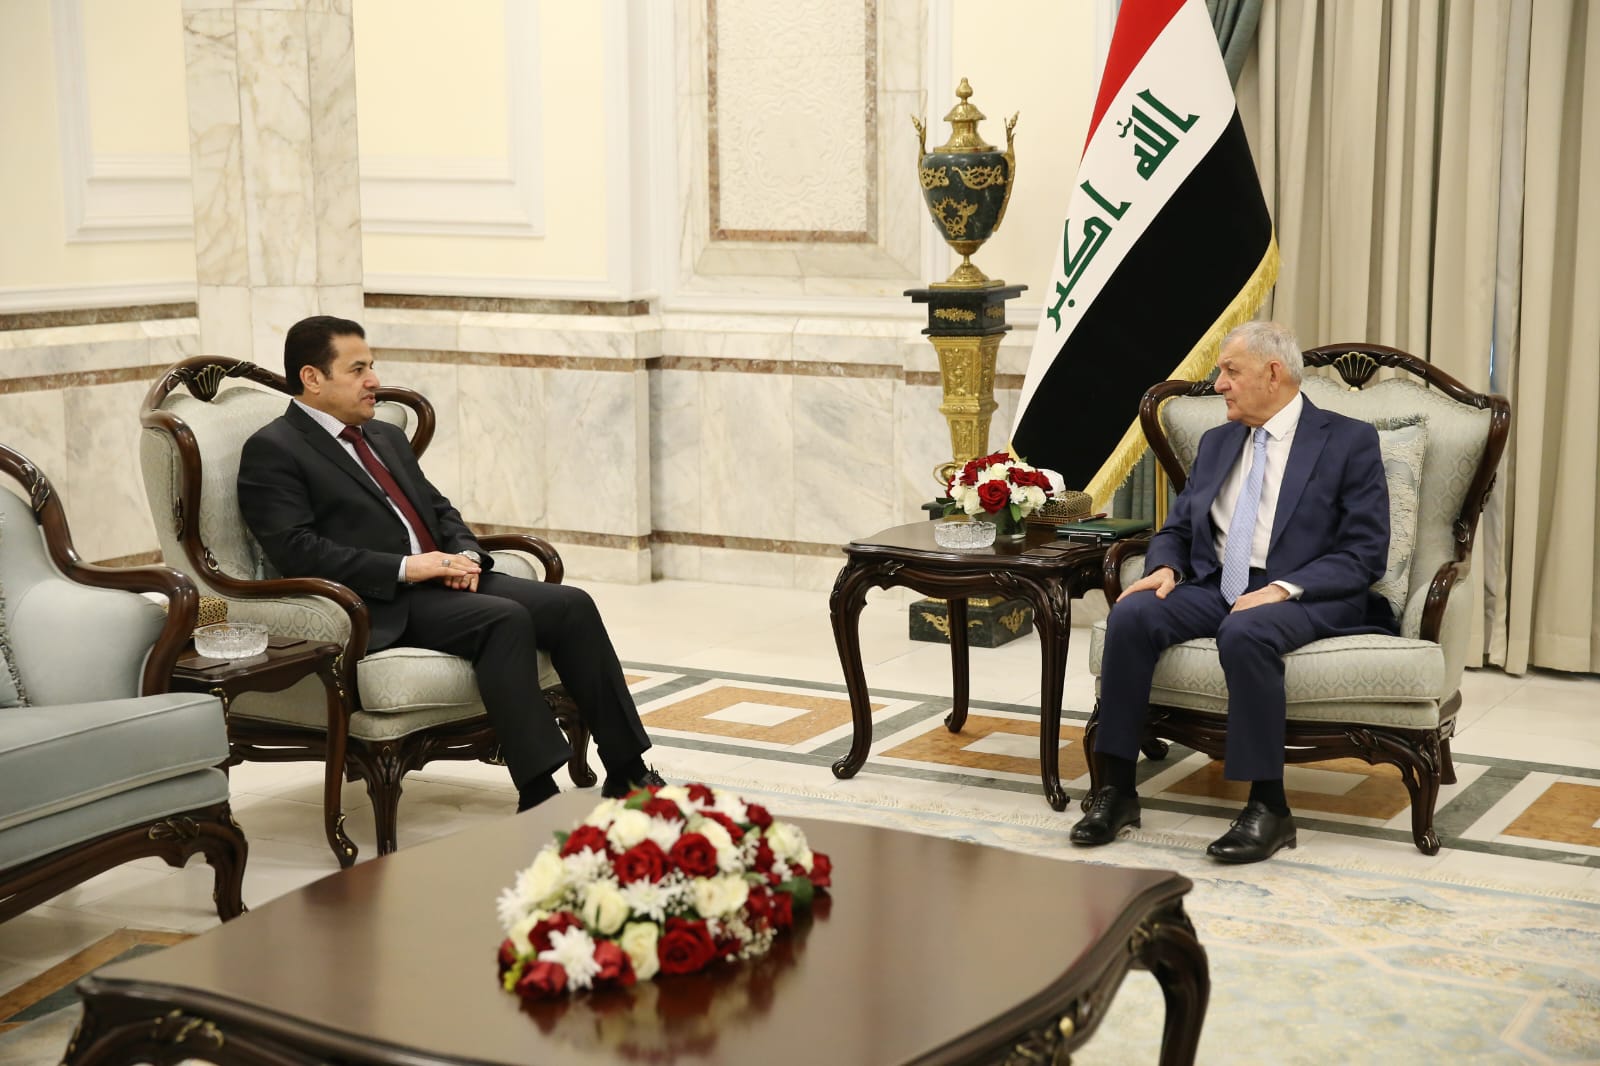 Iraqi president calls for security agreement with Turkey, similar to Iran deal